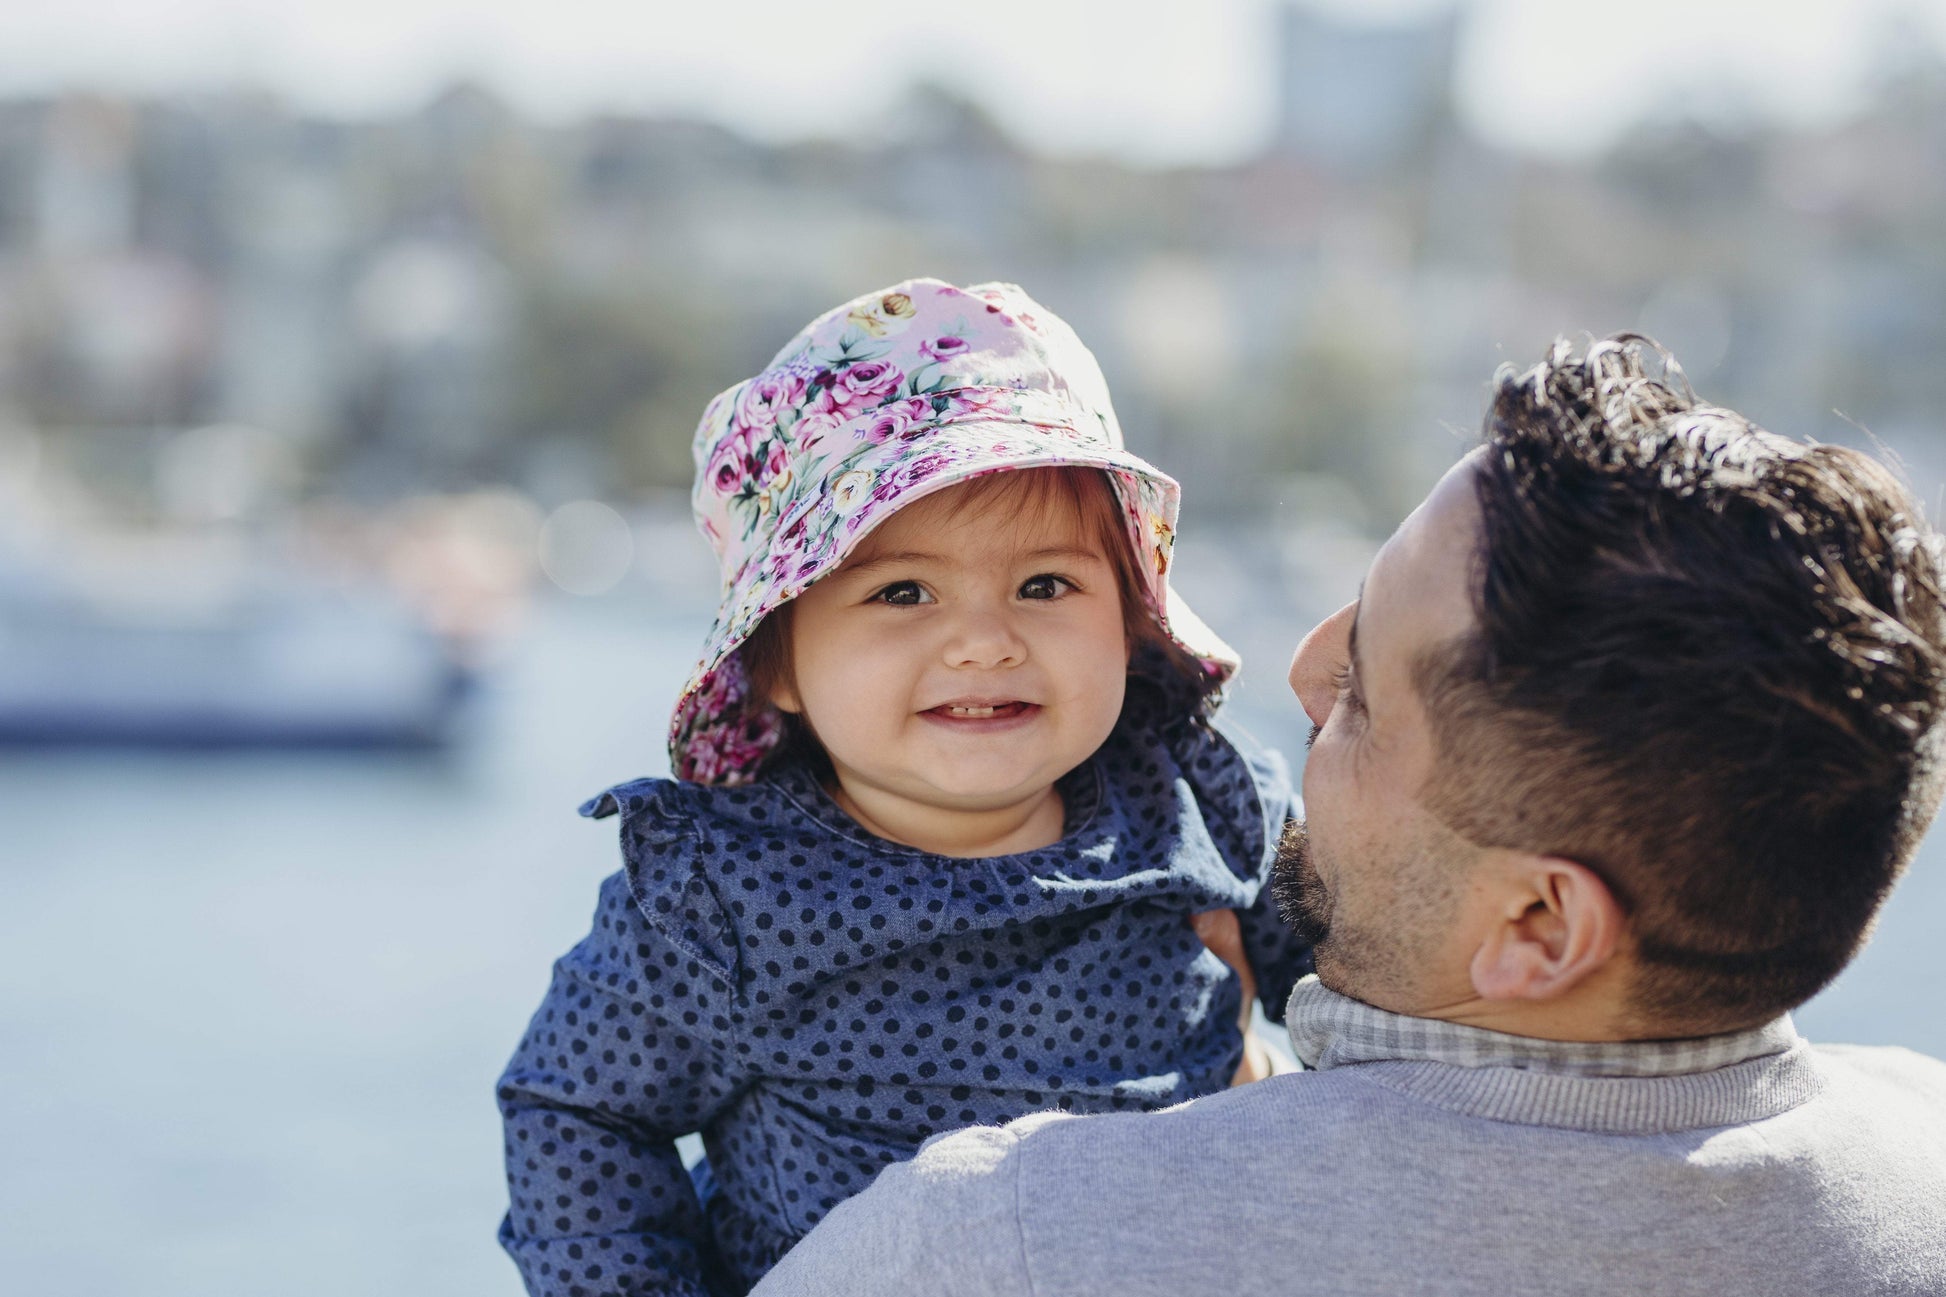 a man holds a young child who smiles as she wears a banz bucket hat near the harbour which is blurred in the background